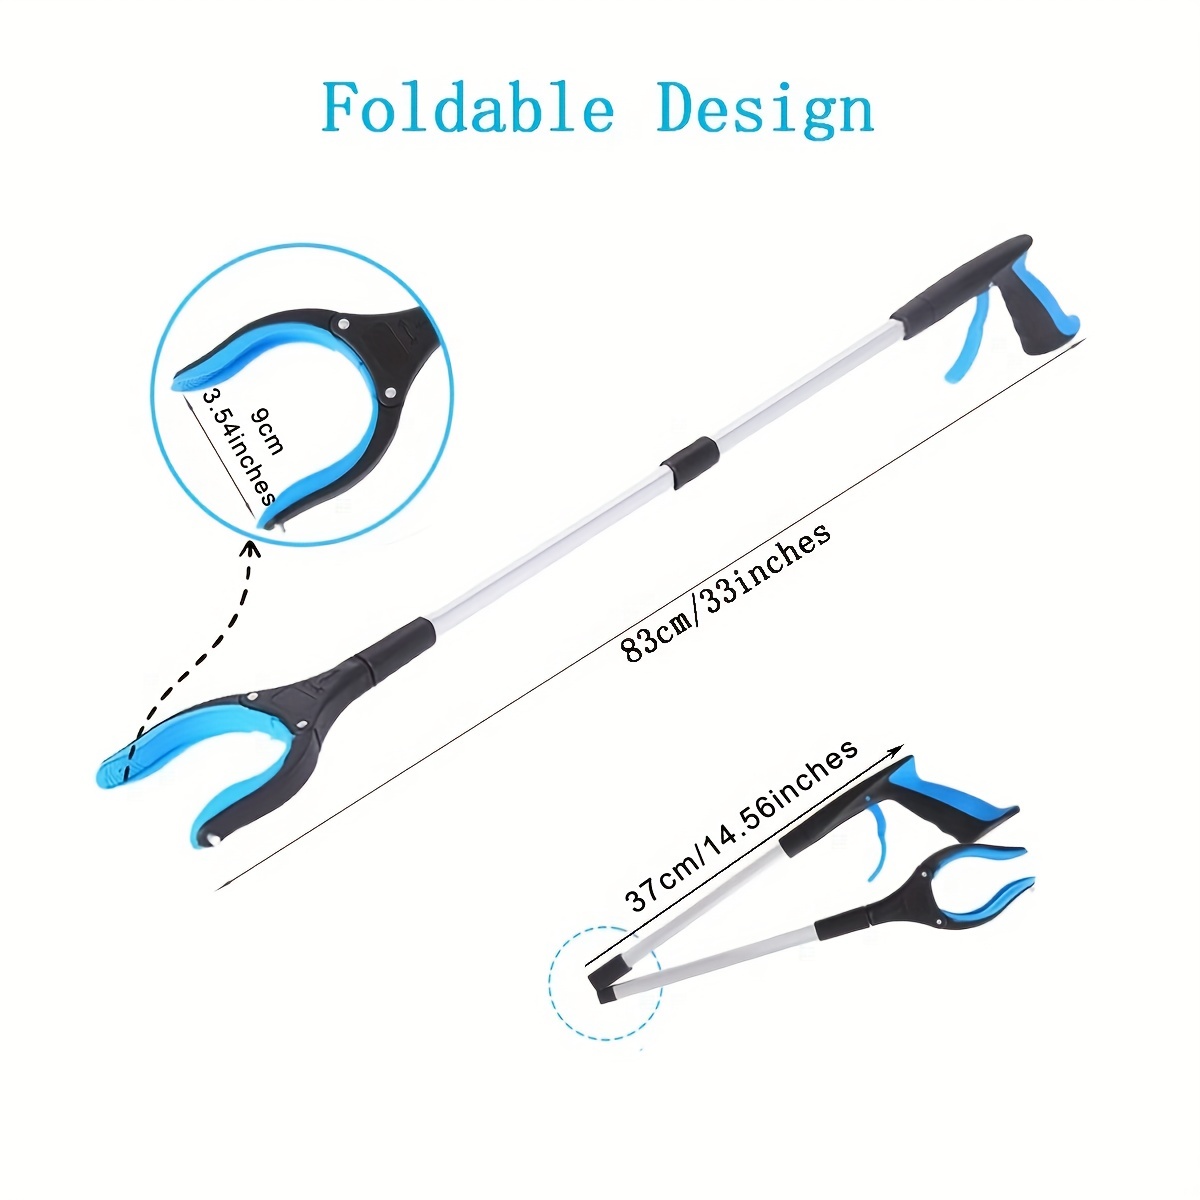 43 Extra Long Grabber Tool, Foldable Grabbers for Elderly Grab It Reaching  Tool with Rotating Jaw +Magnets, 4 Wide Claw Opening Reacher Grabber